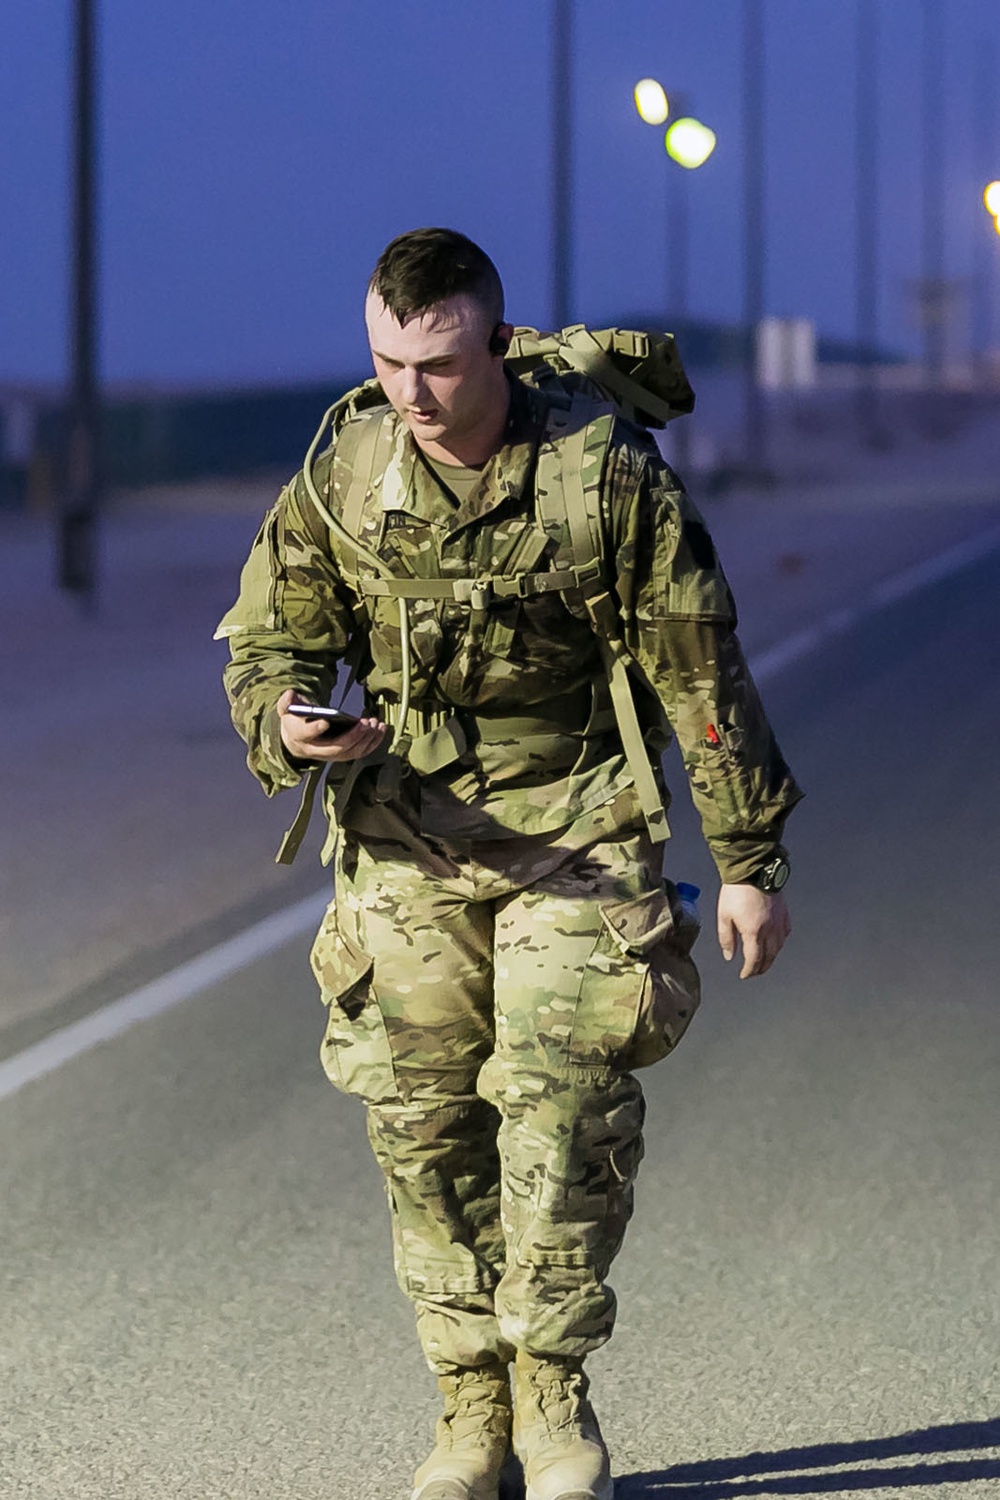 Task Force Spartan, 28 ID soldiers brave the heat of Kuwait to honor Bataan Death March